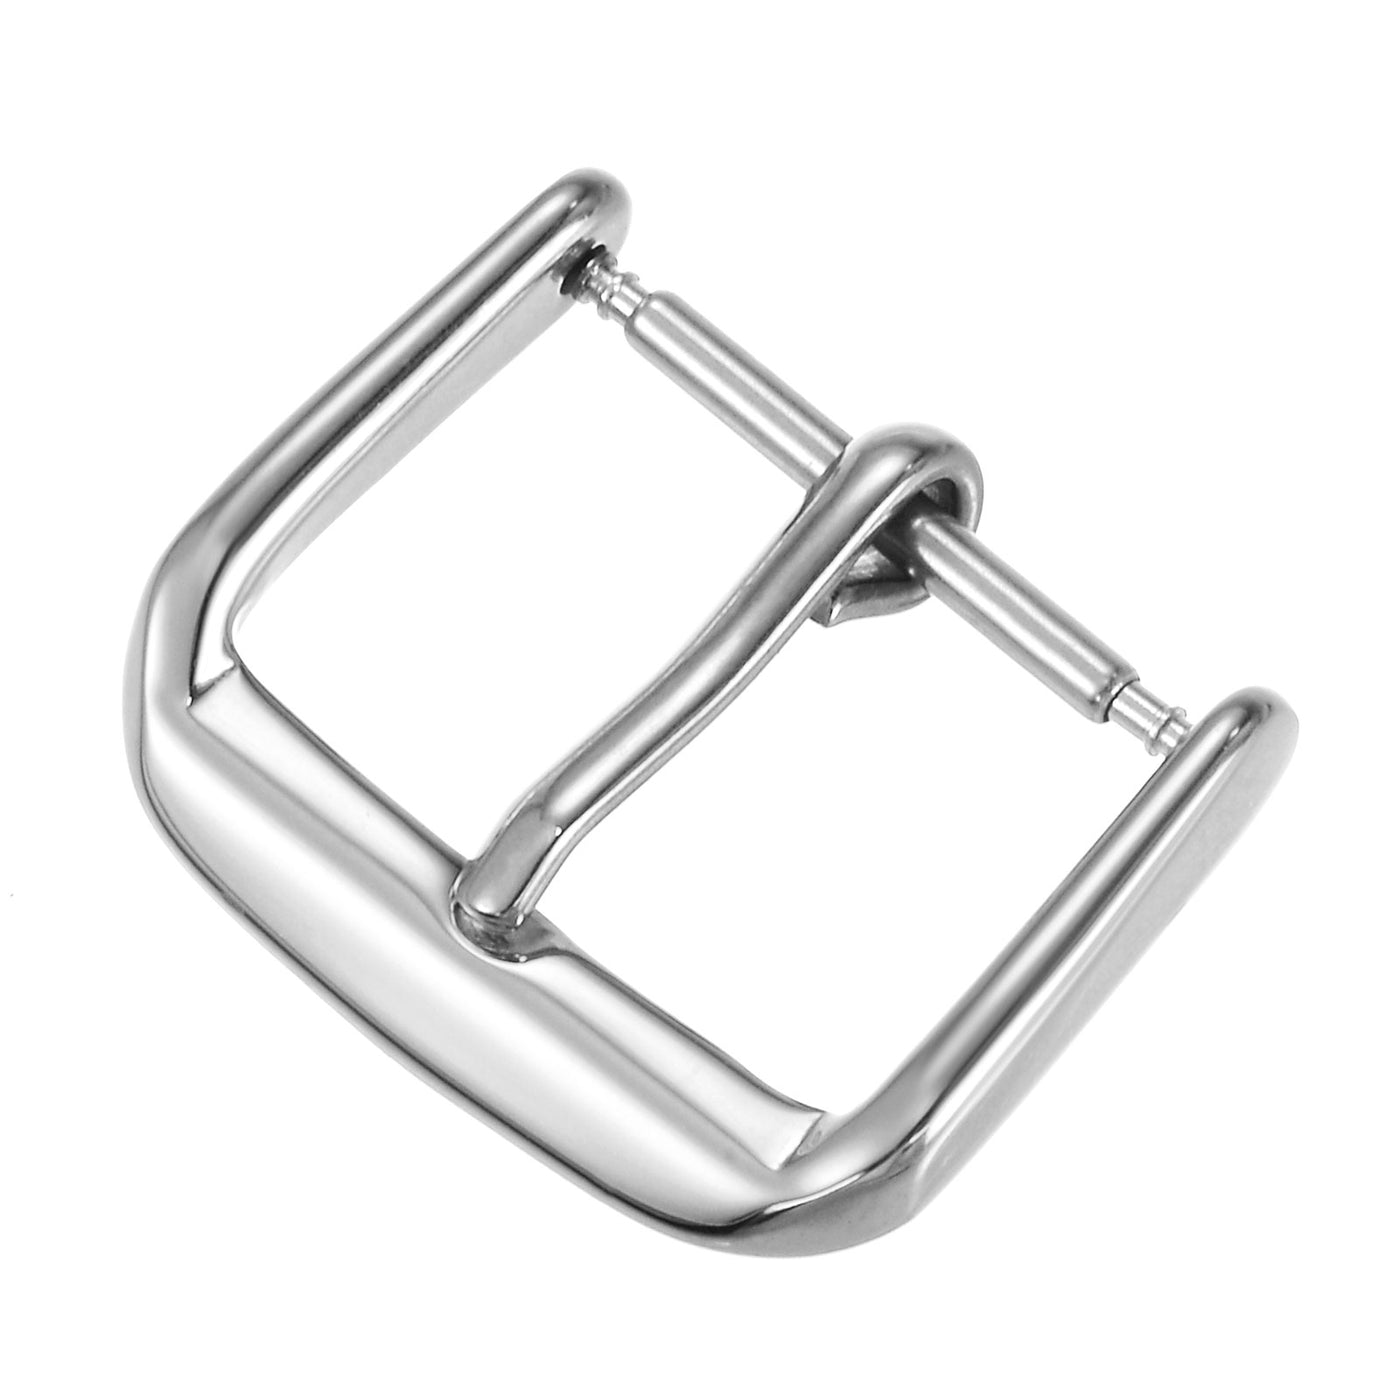 Uxcell Uxcell SUS304 Polished PVD Watch Buckle for 24mm Width Watch Bands Silver Tone